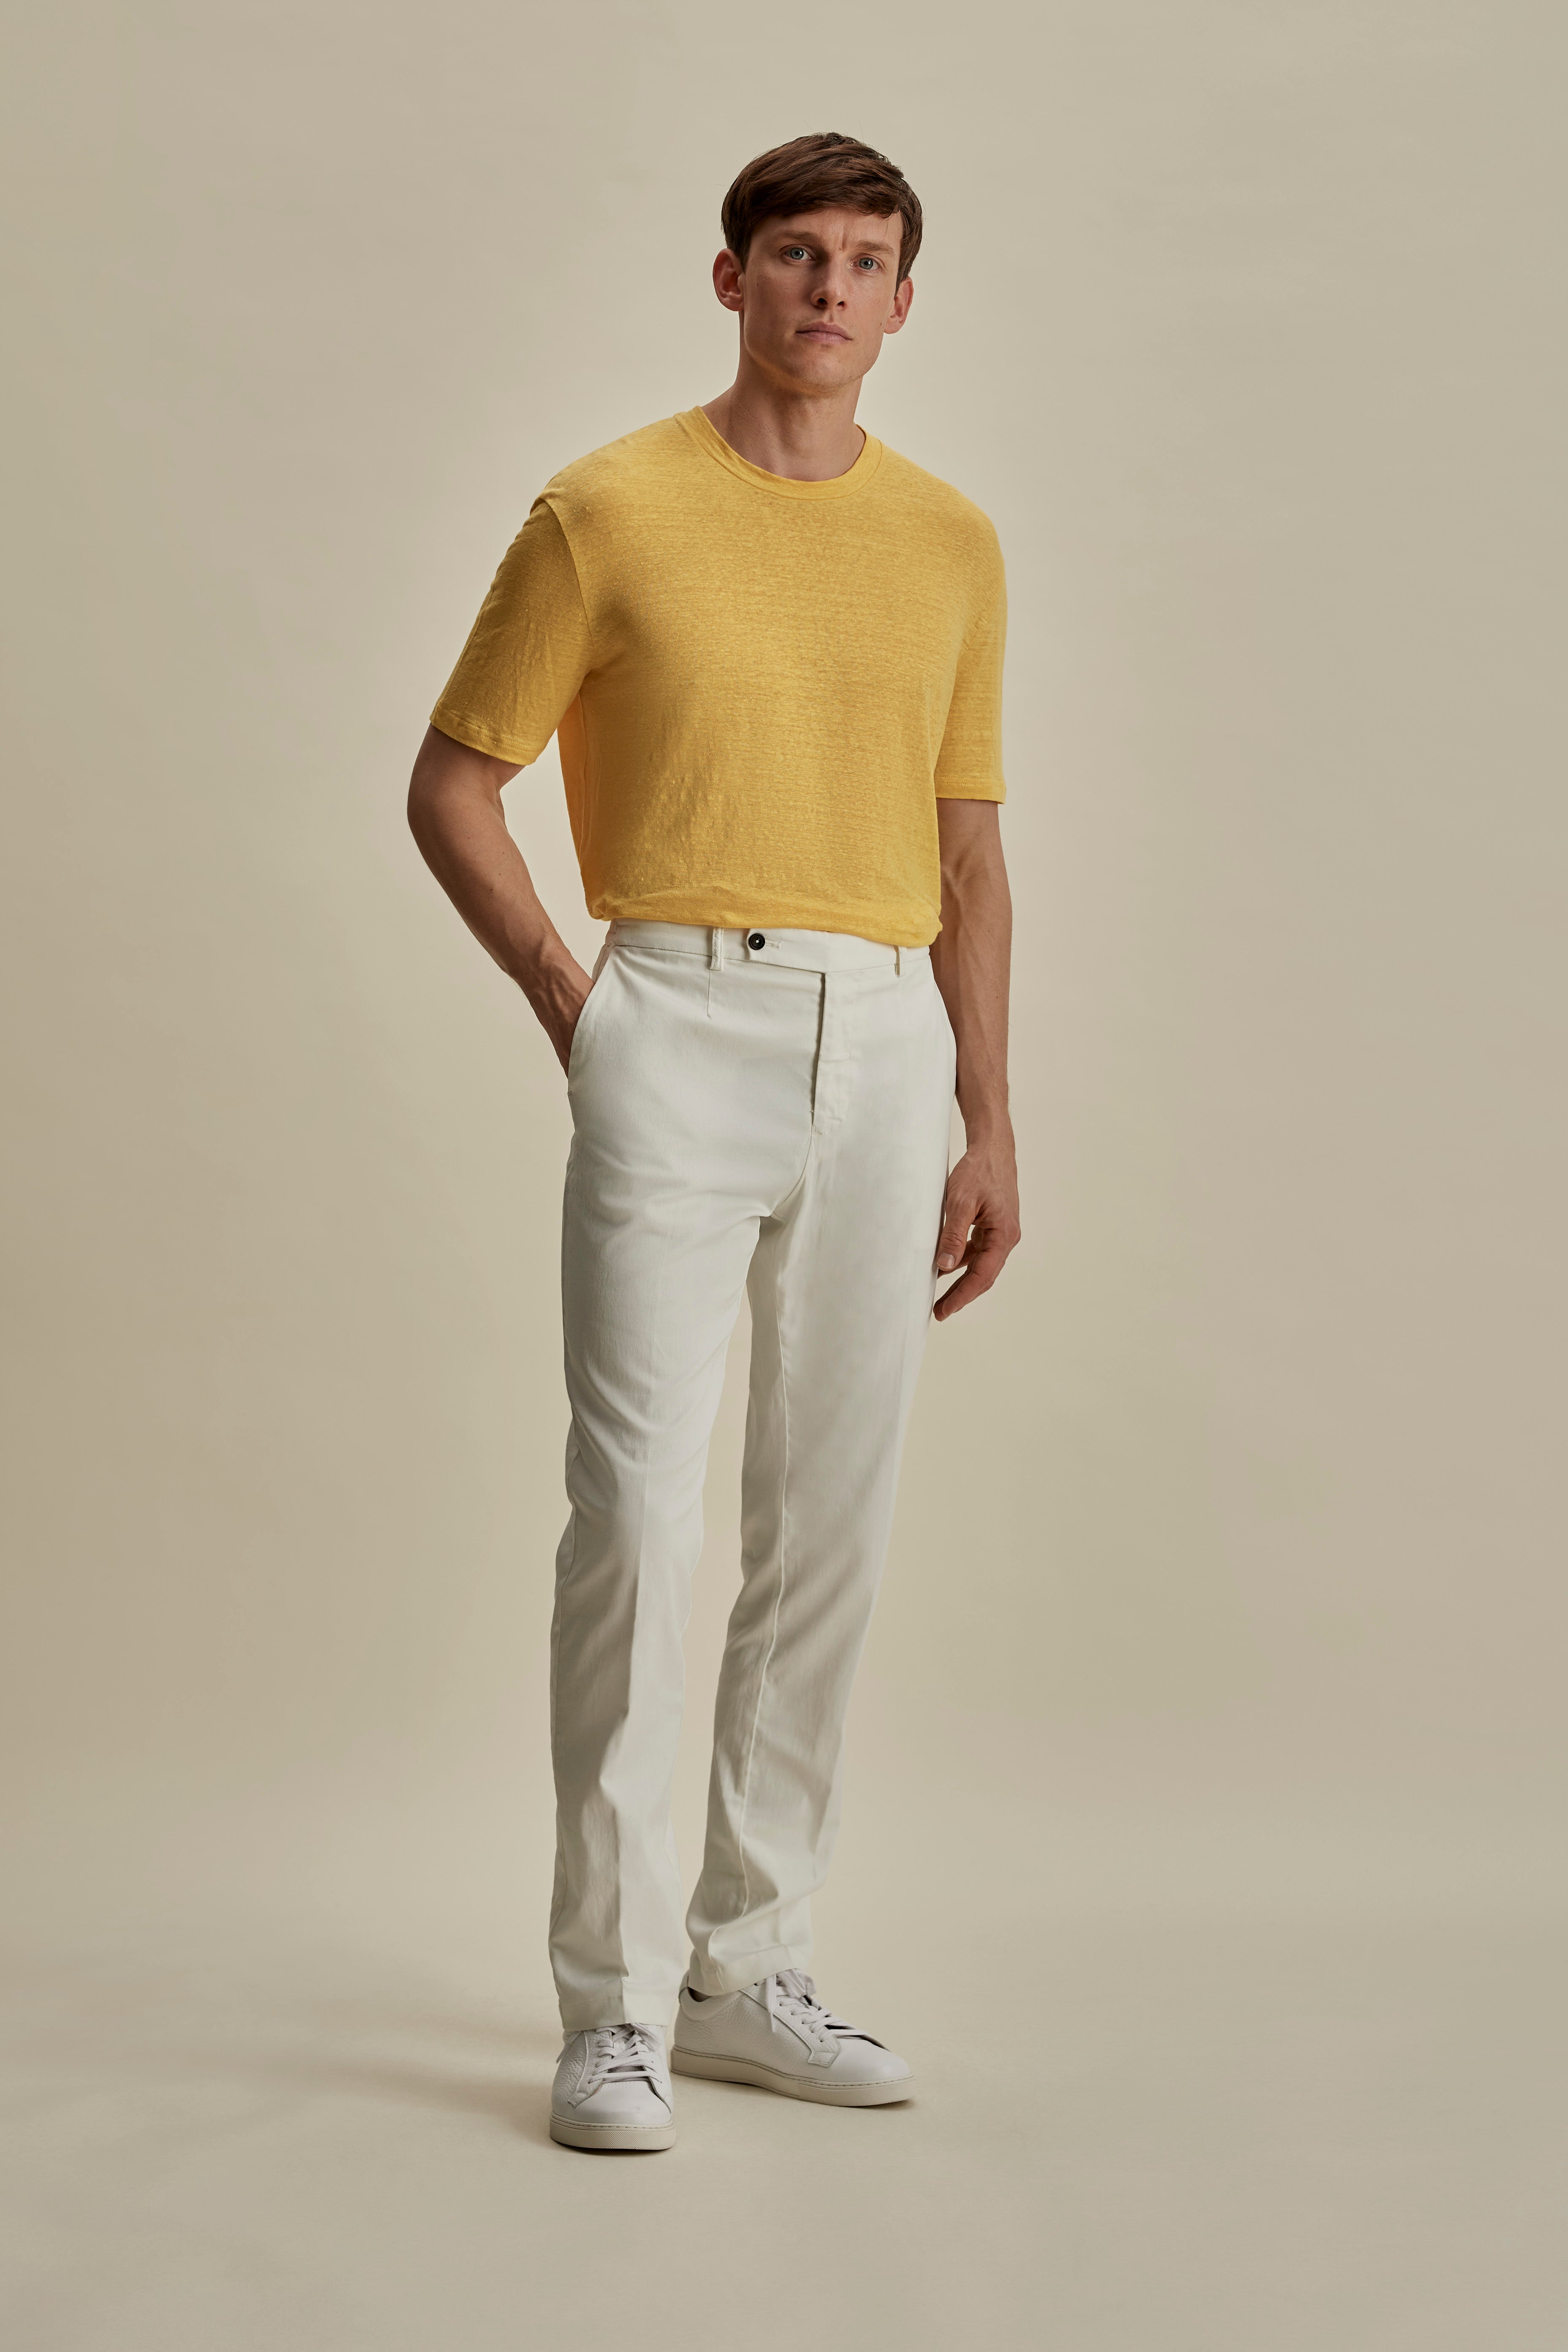 Cotton Easy Fit Flat Front Chinos White Full Length Model Image